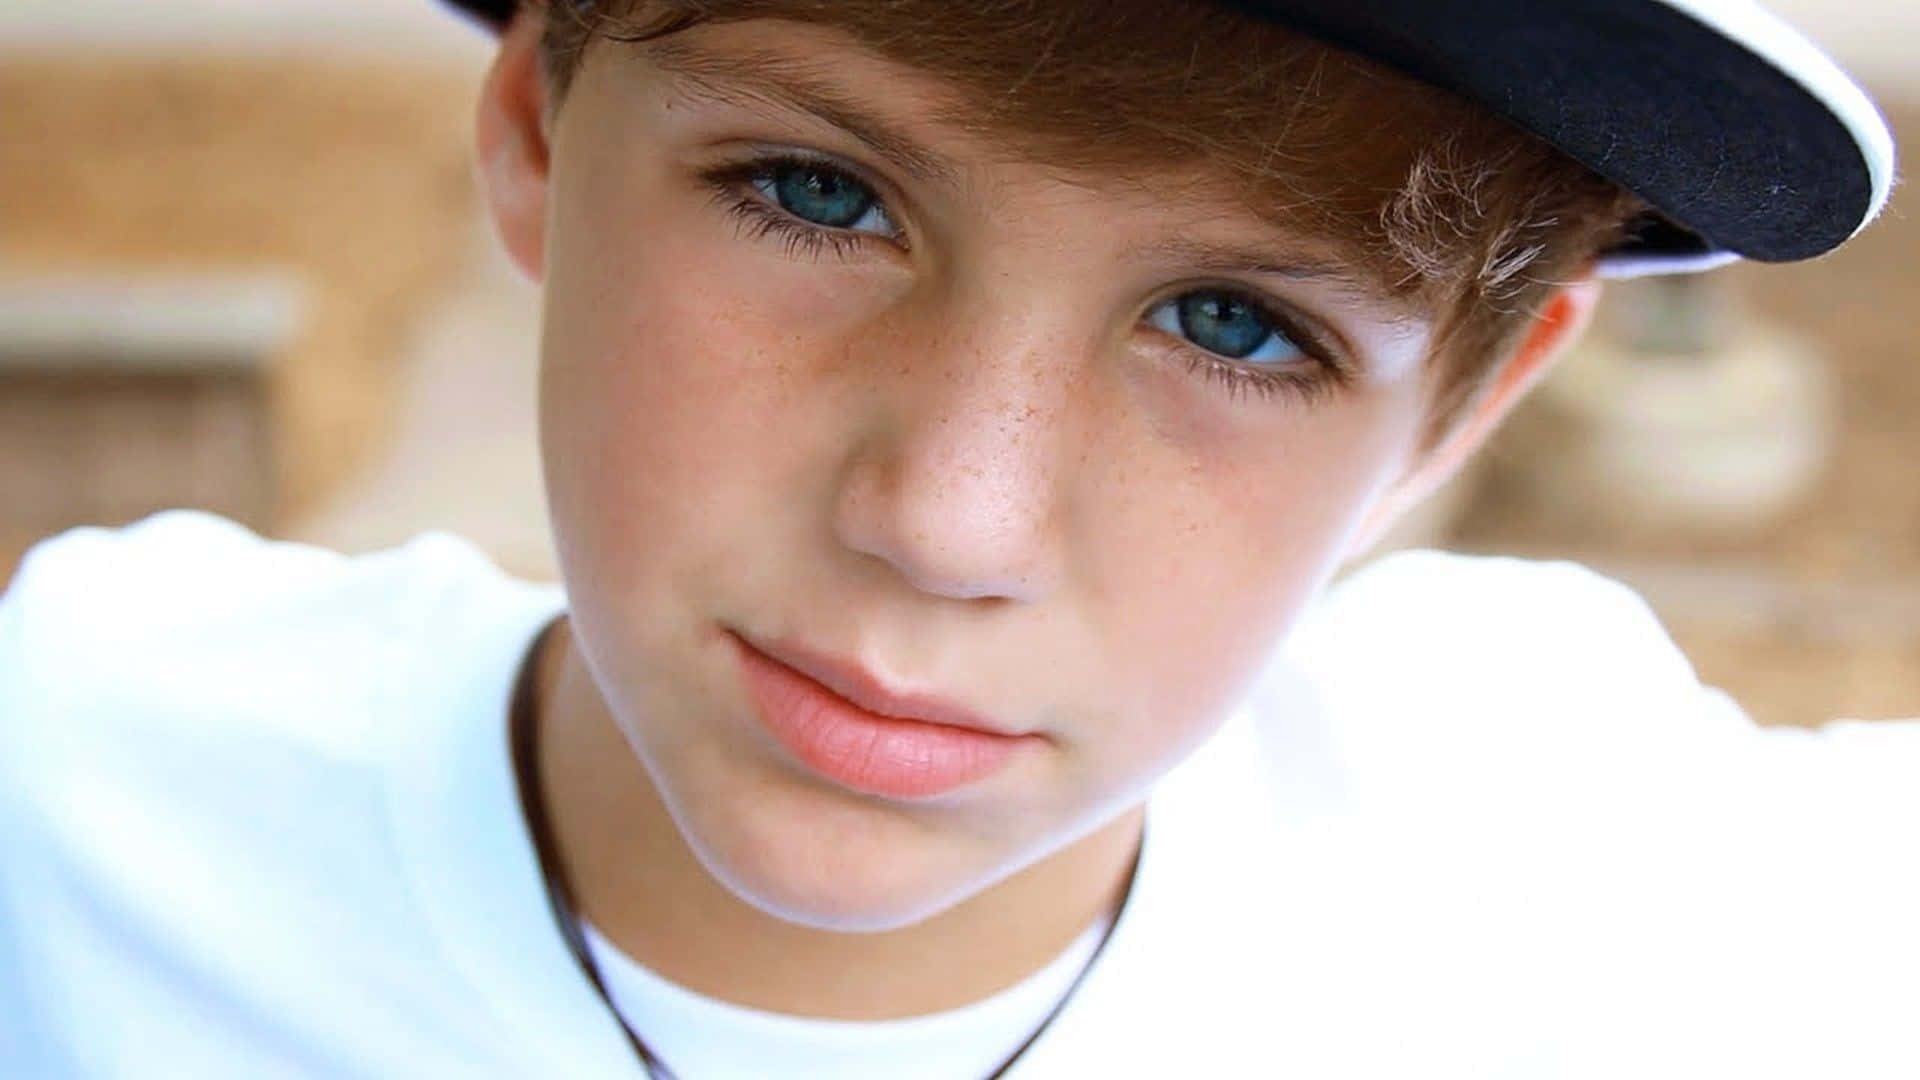 A Young Boy Wearing A Baseball Cap And A Necklace Background